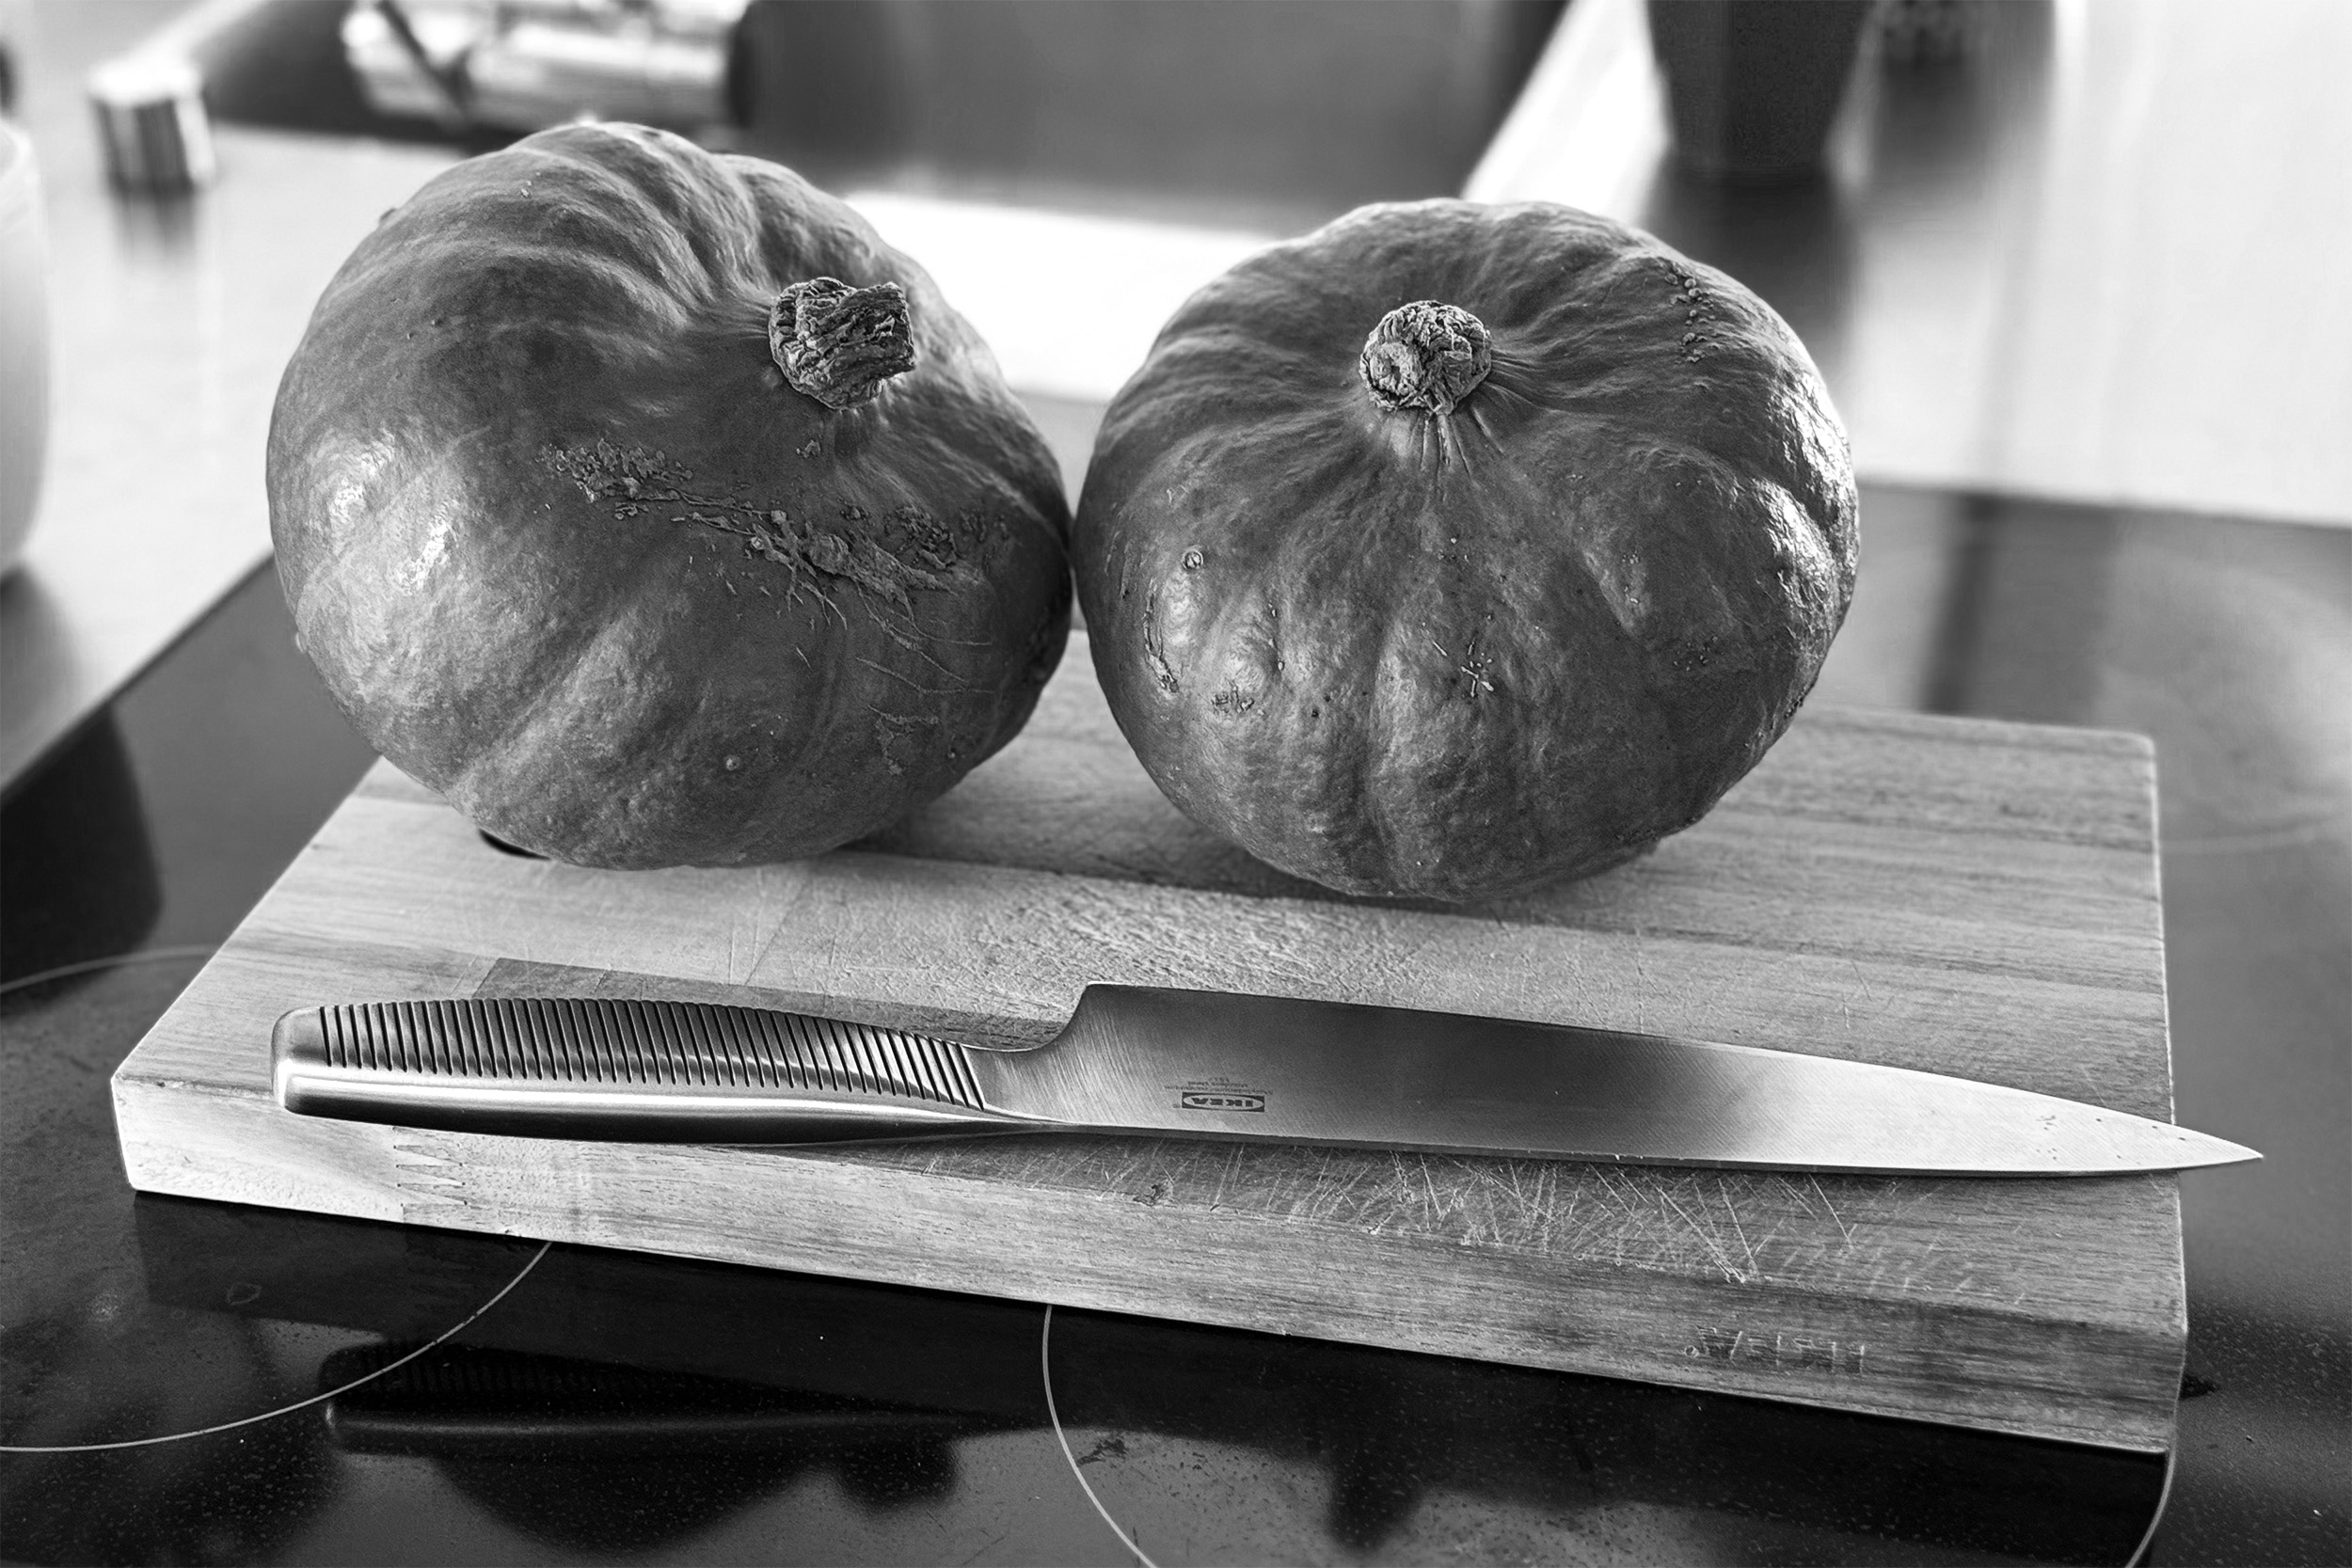 Pumpkins sitting on a cutting board, ready to be made into a delicious soup.